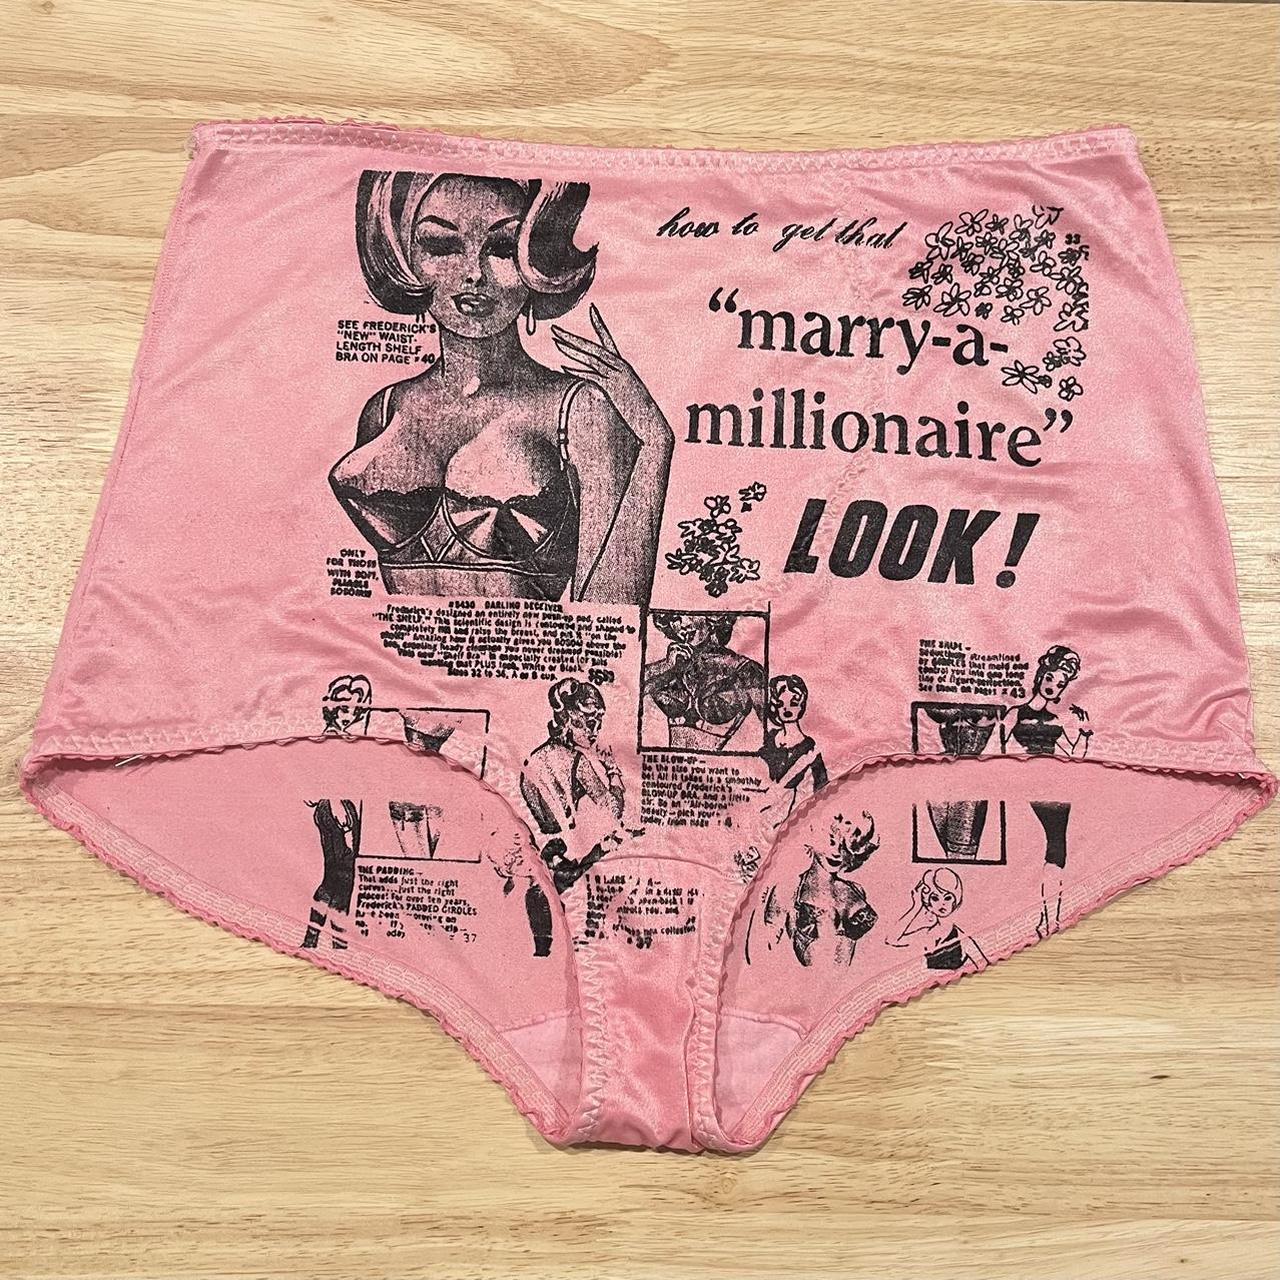 Vintage see through bloomers. These are stretchy and - Depop